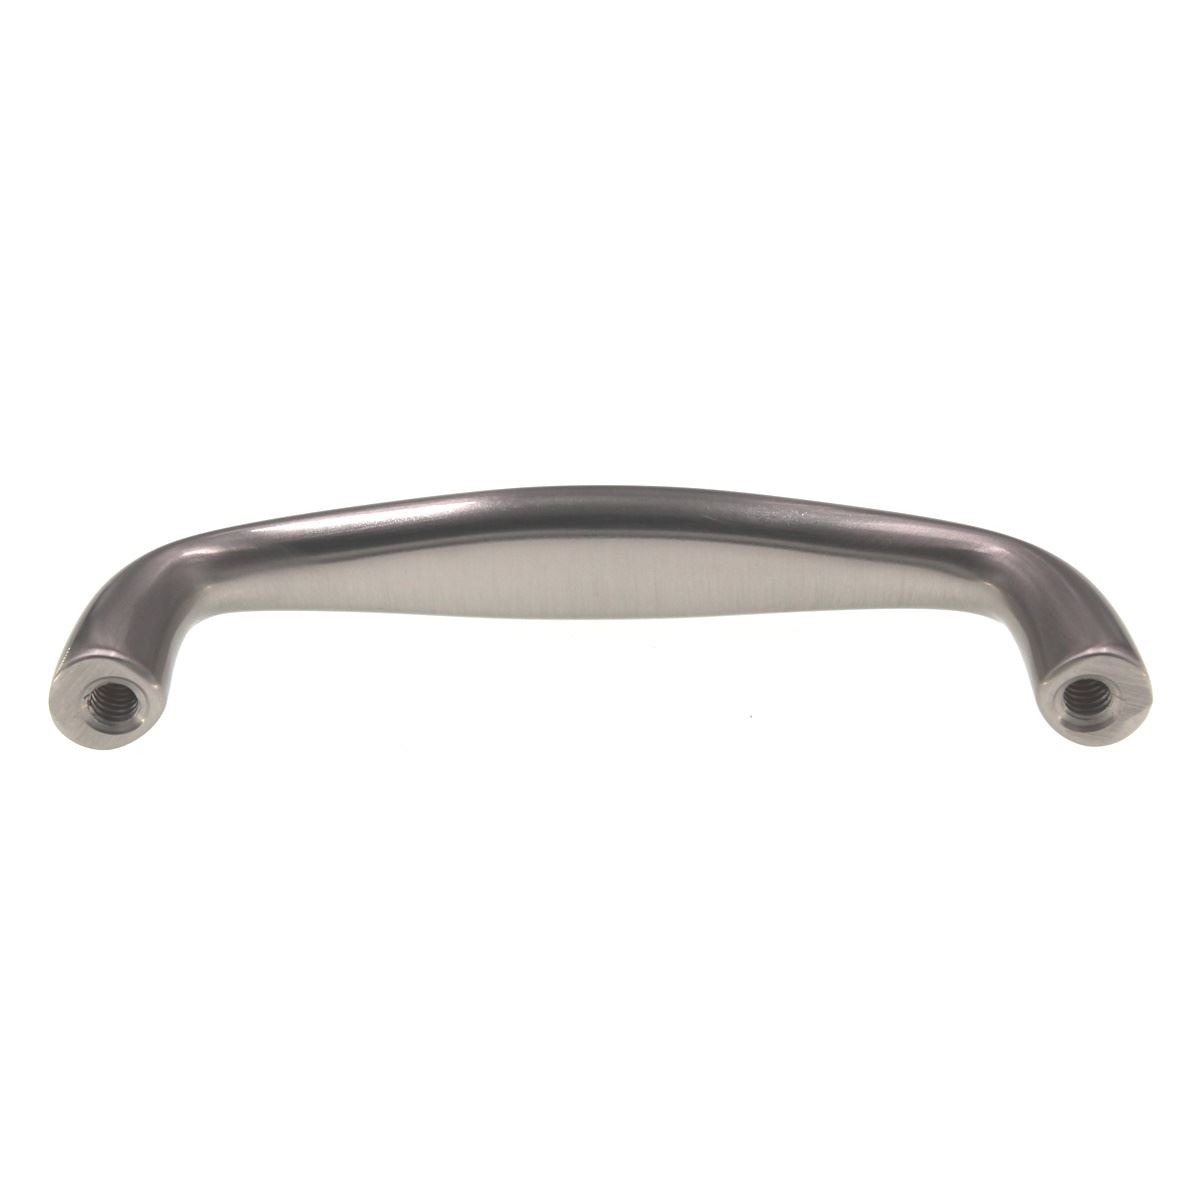 Schaub And Company Traditional Cabinet Arch Pull 3" Ctr Satin Nickel 721-15